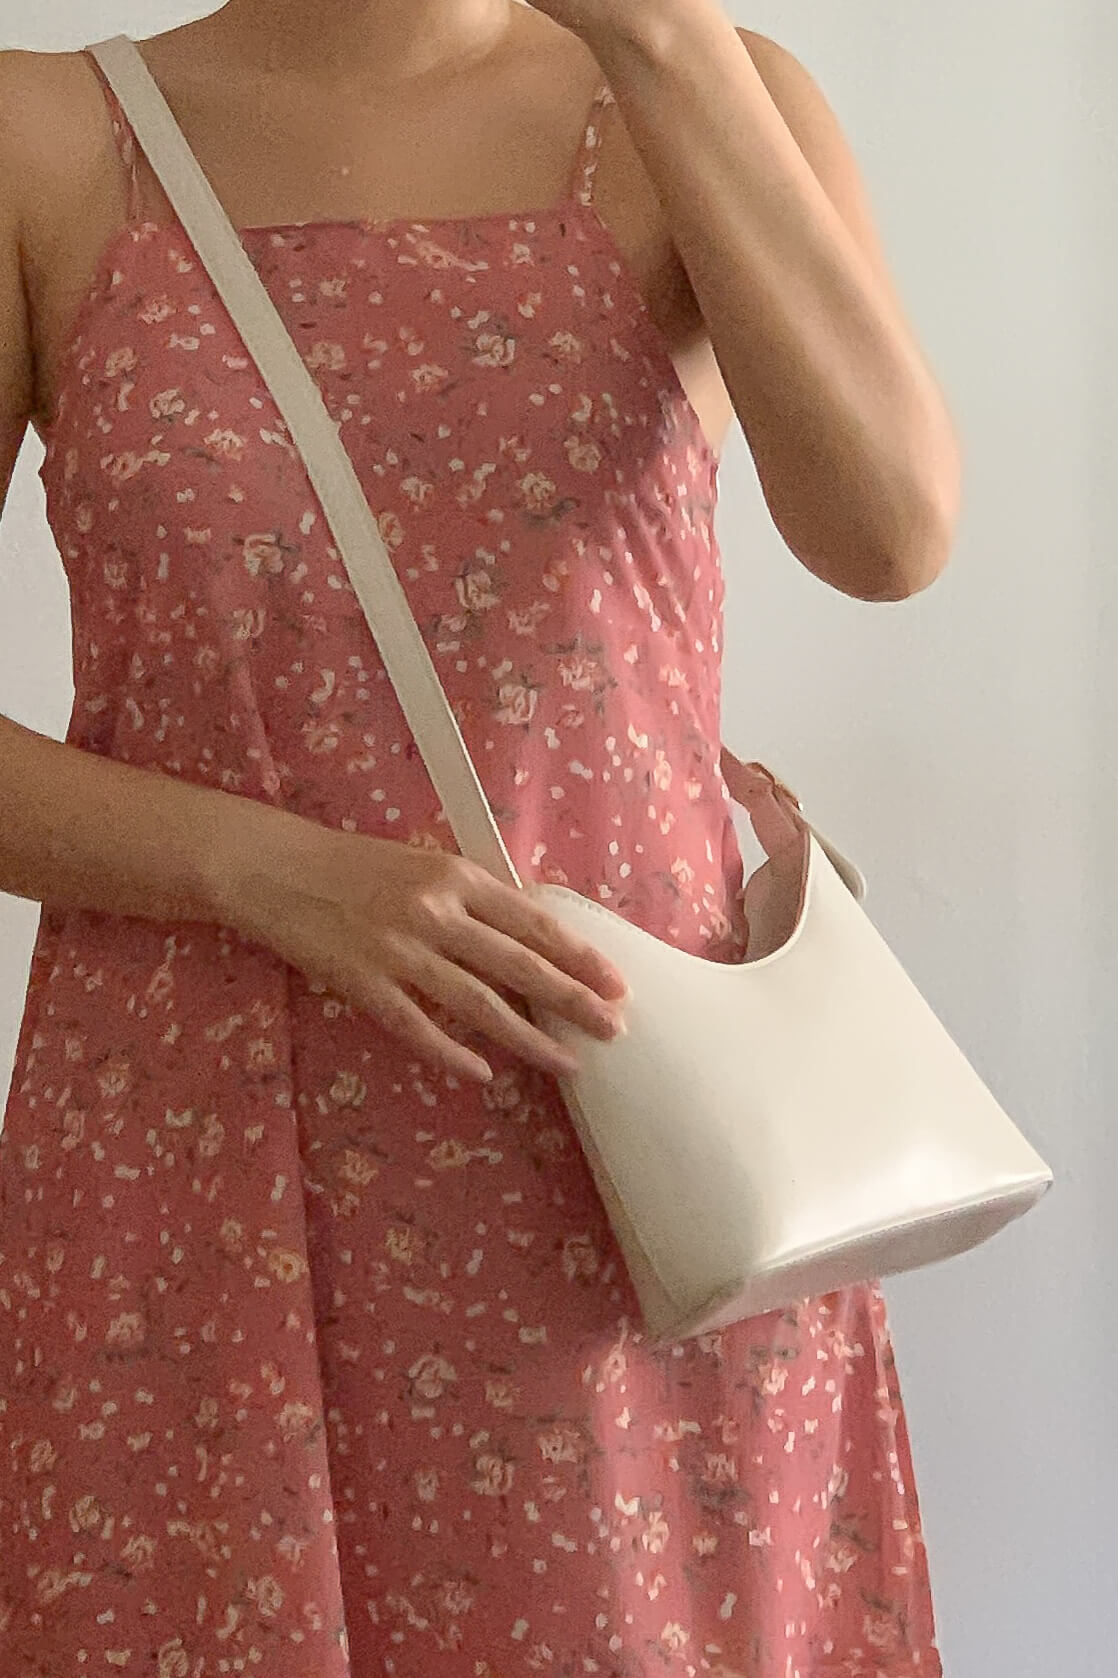 Small and simple shoulder carry bag with adjustable straps